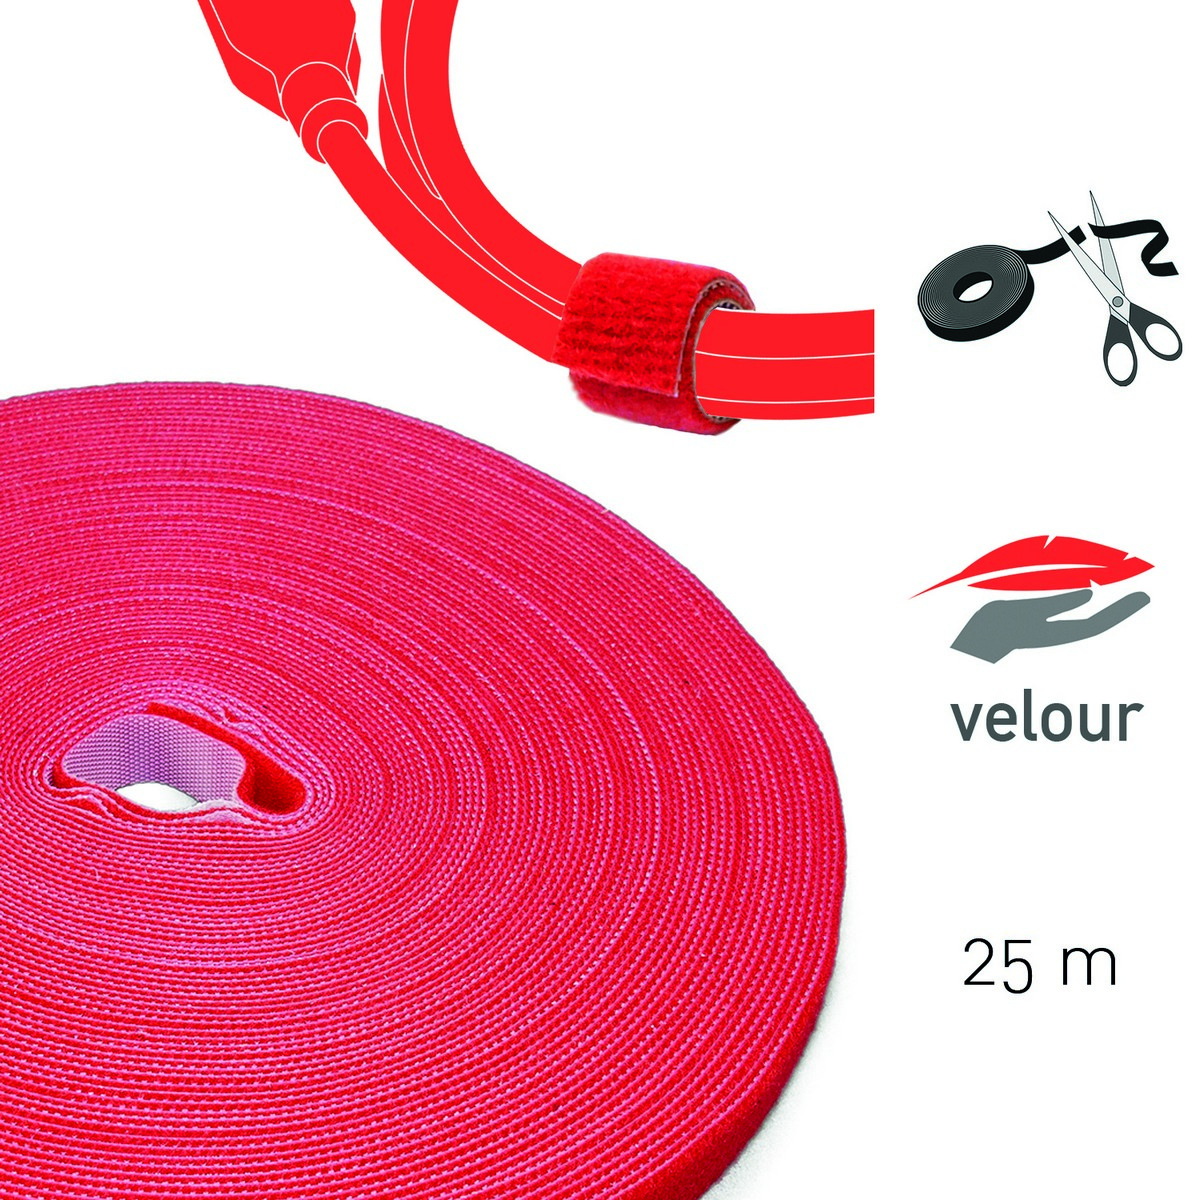 LTC - LTC Pro Roll, Cable Management Hook and Loop Tape (Red)